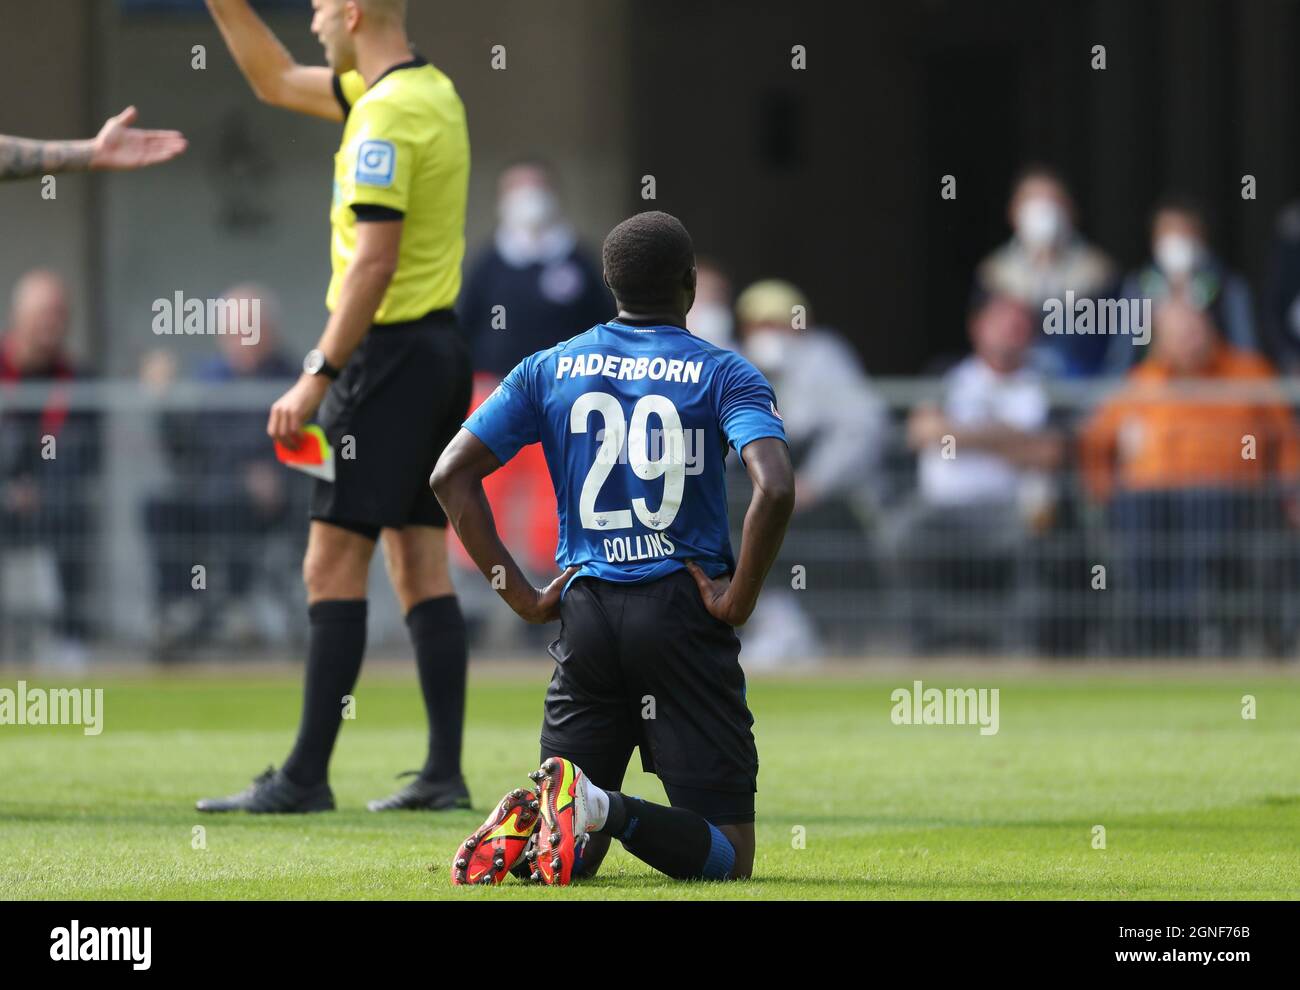 Paderborn, Germany. 25th Sep, 2021. Football: 2. Bundesliga, SC Paderborn 07 - Holstein Kiel, Matchday 8 at Benteler-Arena. Paderborn's Jamilu Collins is disappointed after receiving a yellow card. Credit: Friso Gentsch/dpa - IMPORTANT NOTE: In accordance with the regulations of the DFL Deutsche Fußball Liga and/or the DFB Deutscher Fußball-Bund, it is prohibited to use or have used photographs taken in the stadium and/or of the match in the form of sequence pictures and/or video-like photo series./dpa/Alamy Live News Stock Photo